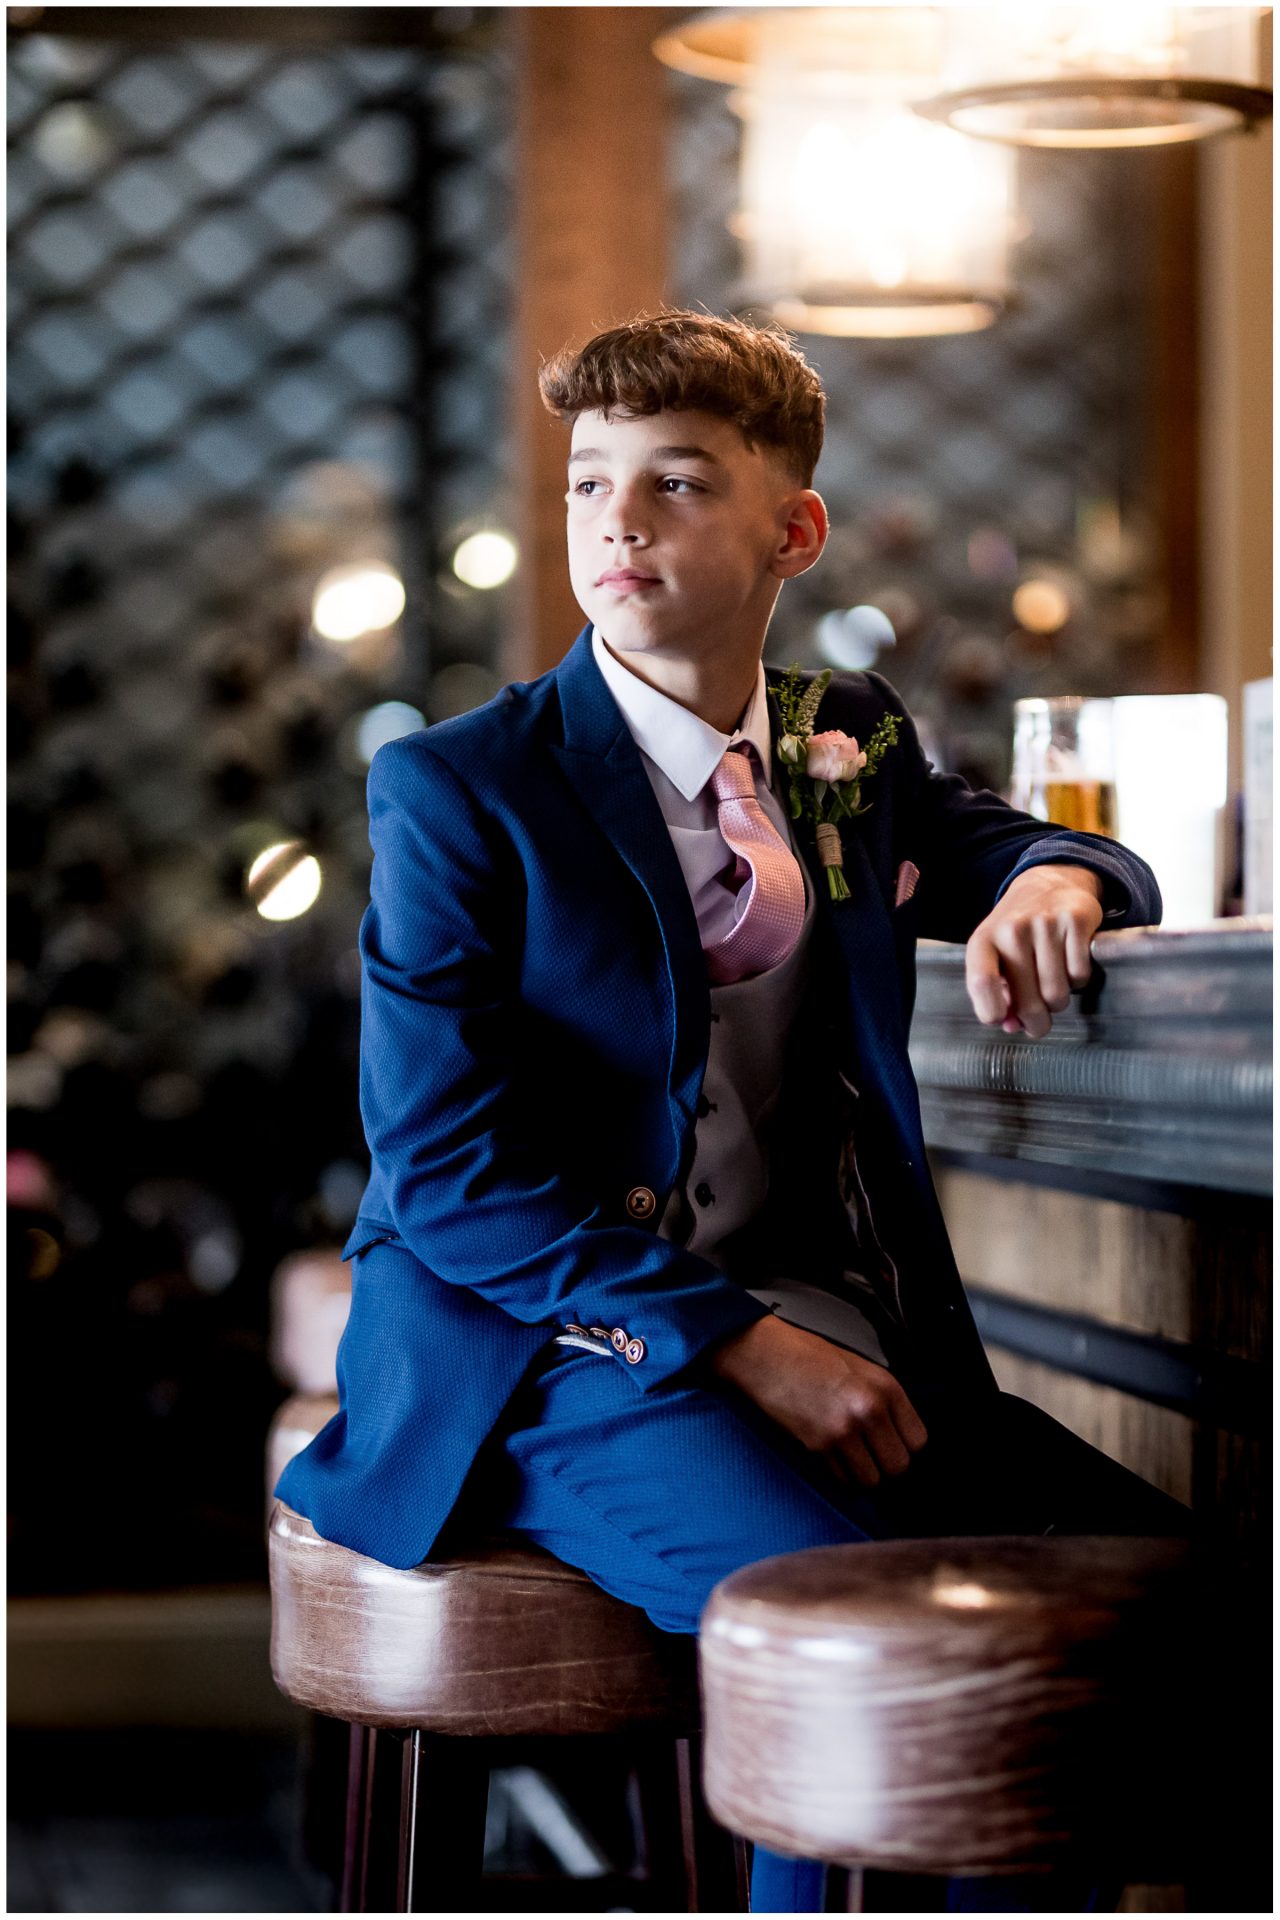 Portrait of the groom's son at the hotel bar